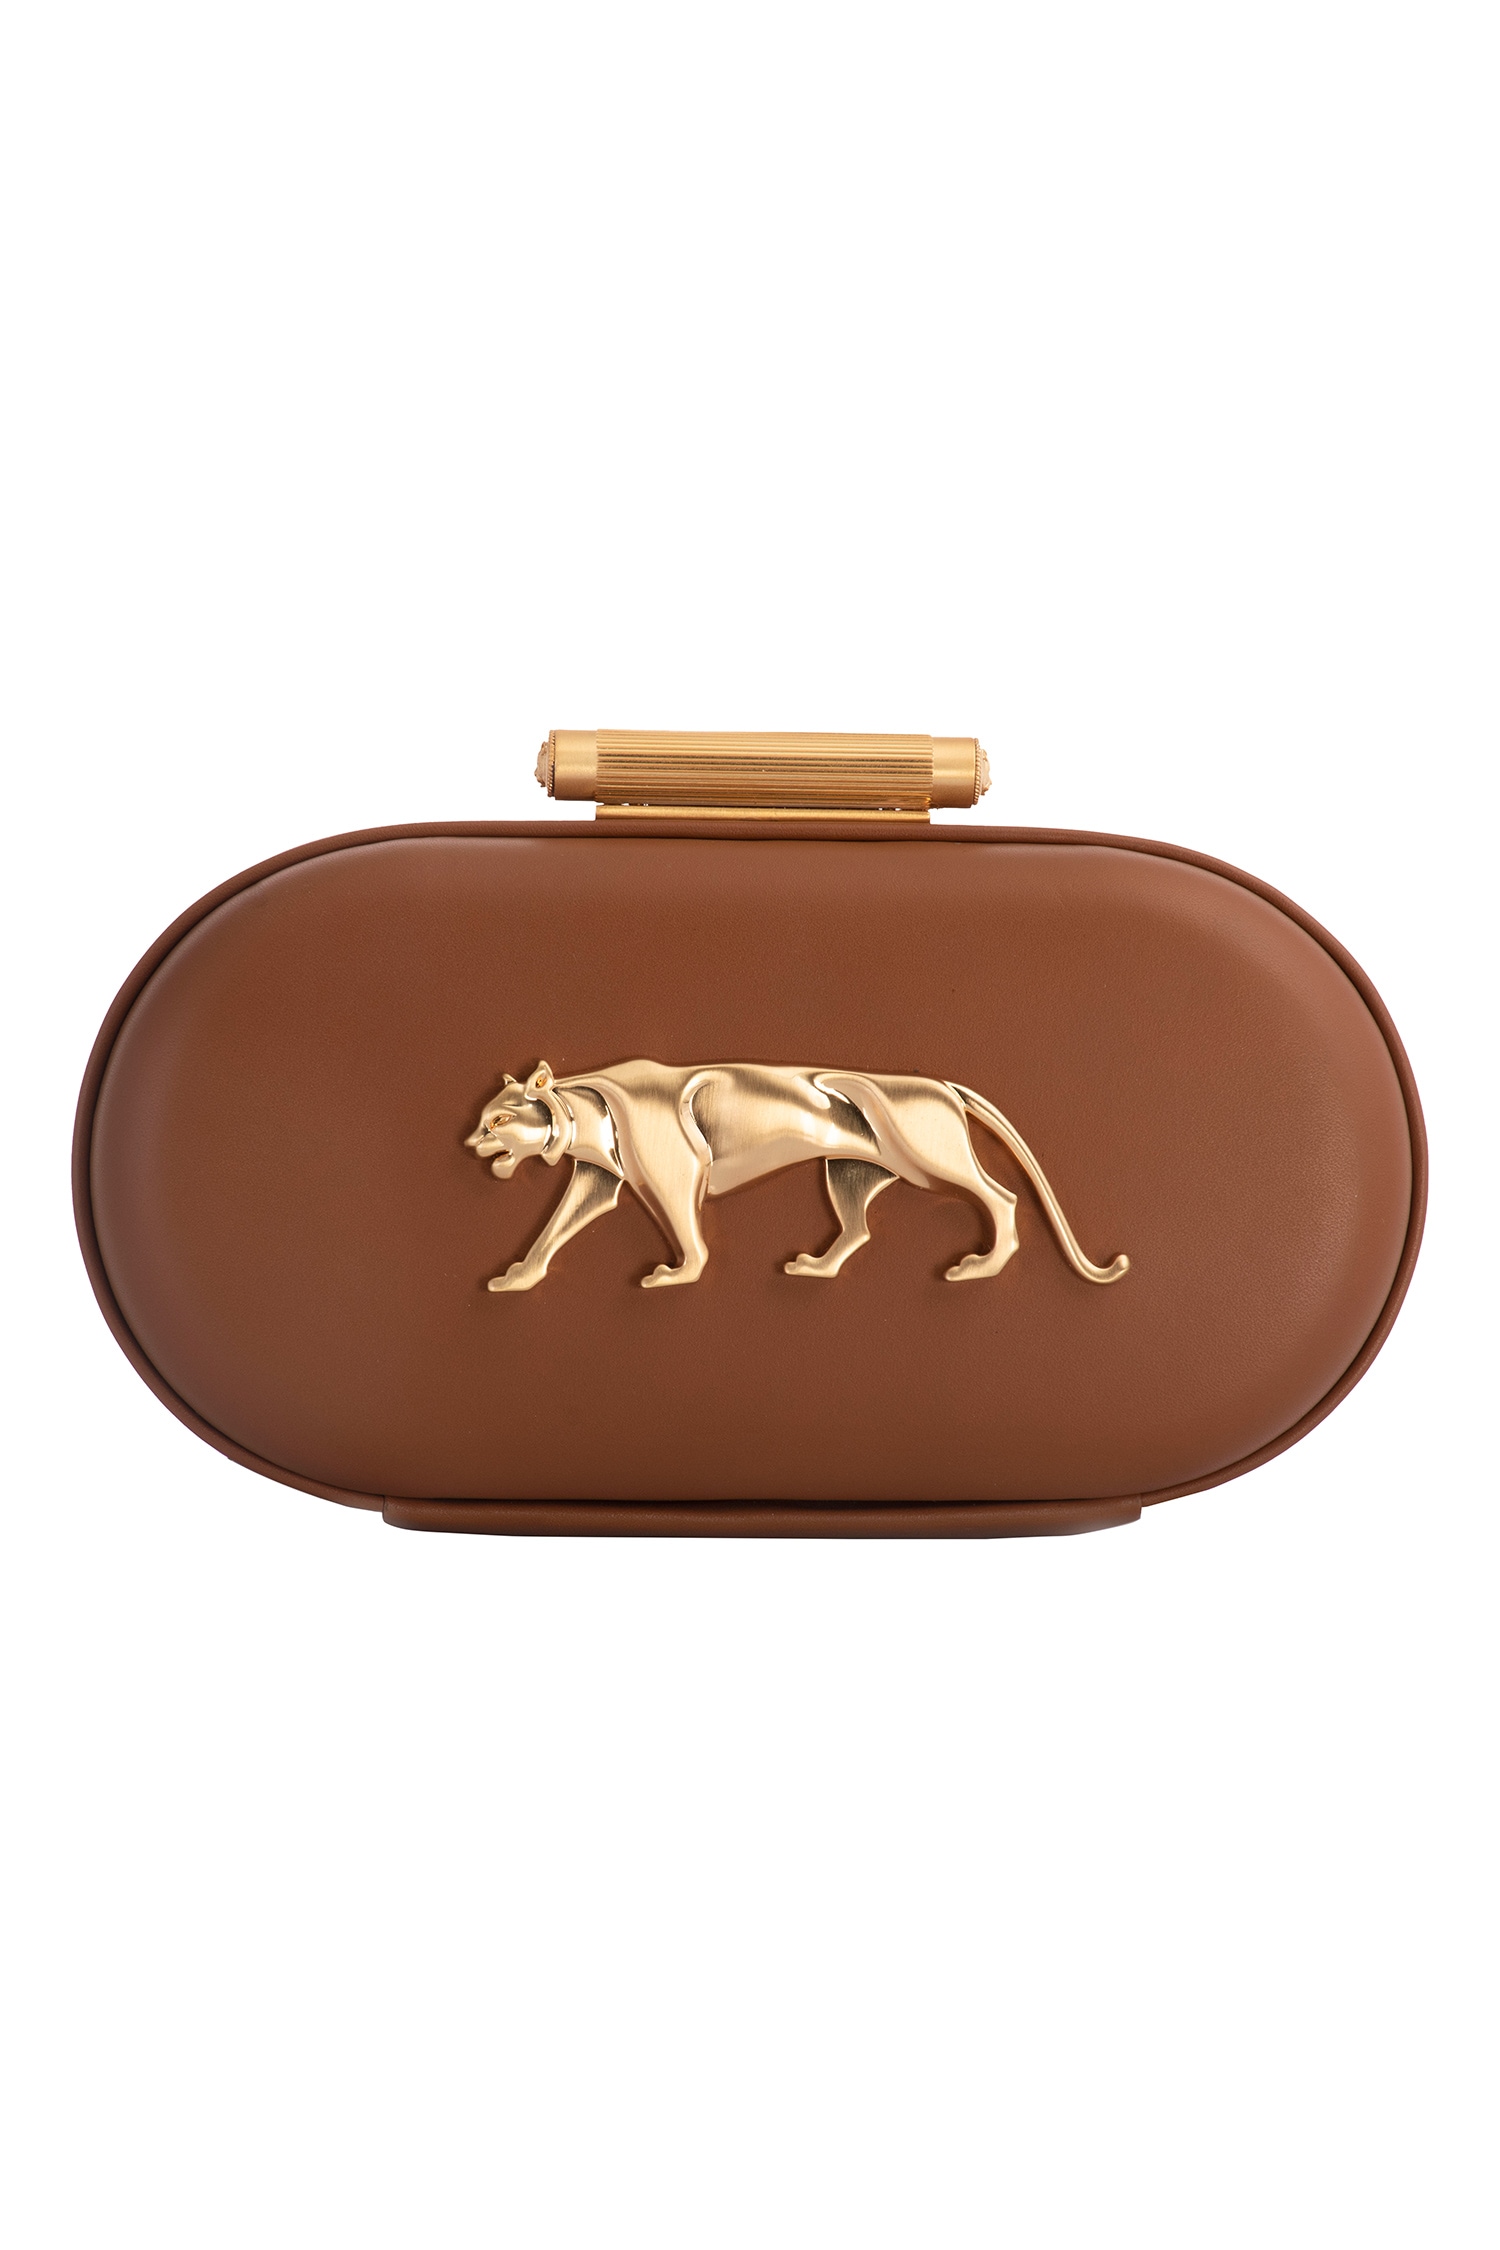 The Royal Bengal Carved Logo Clutch